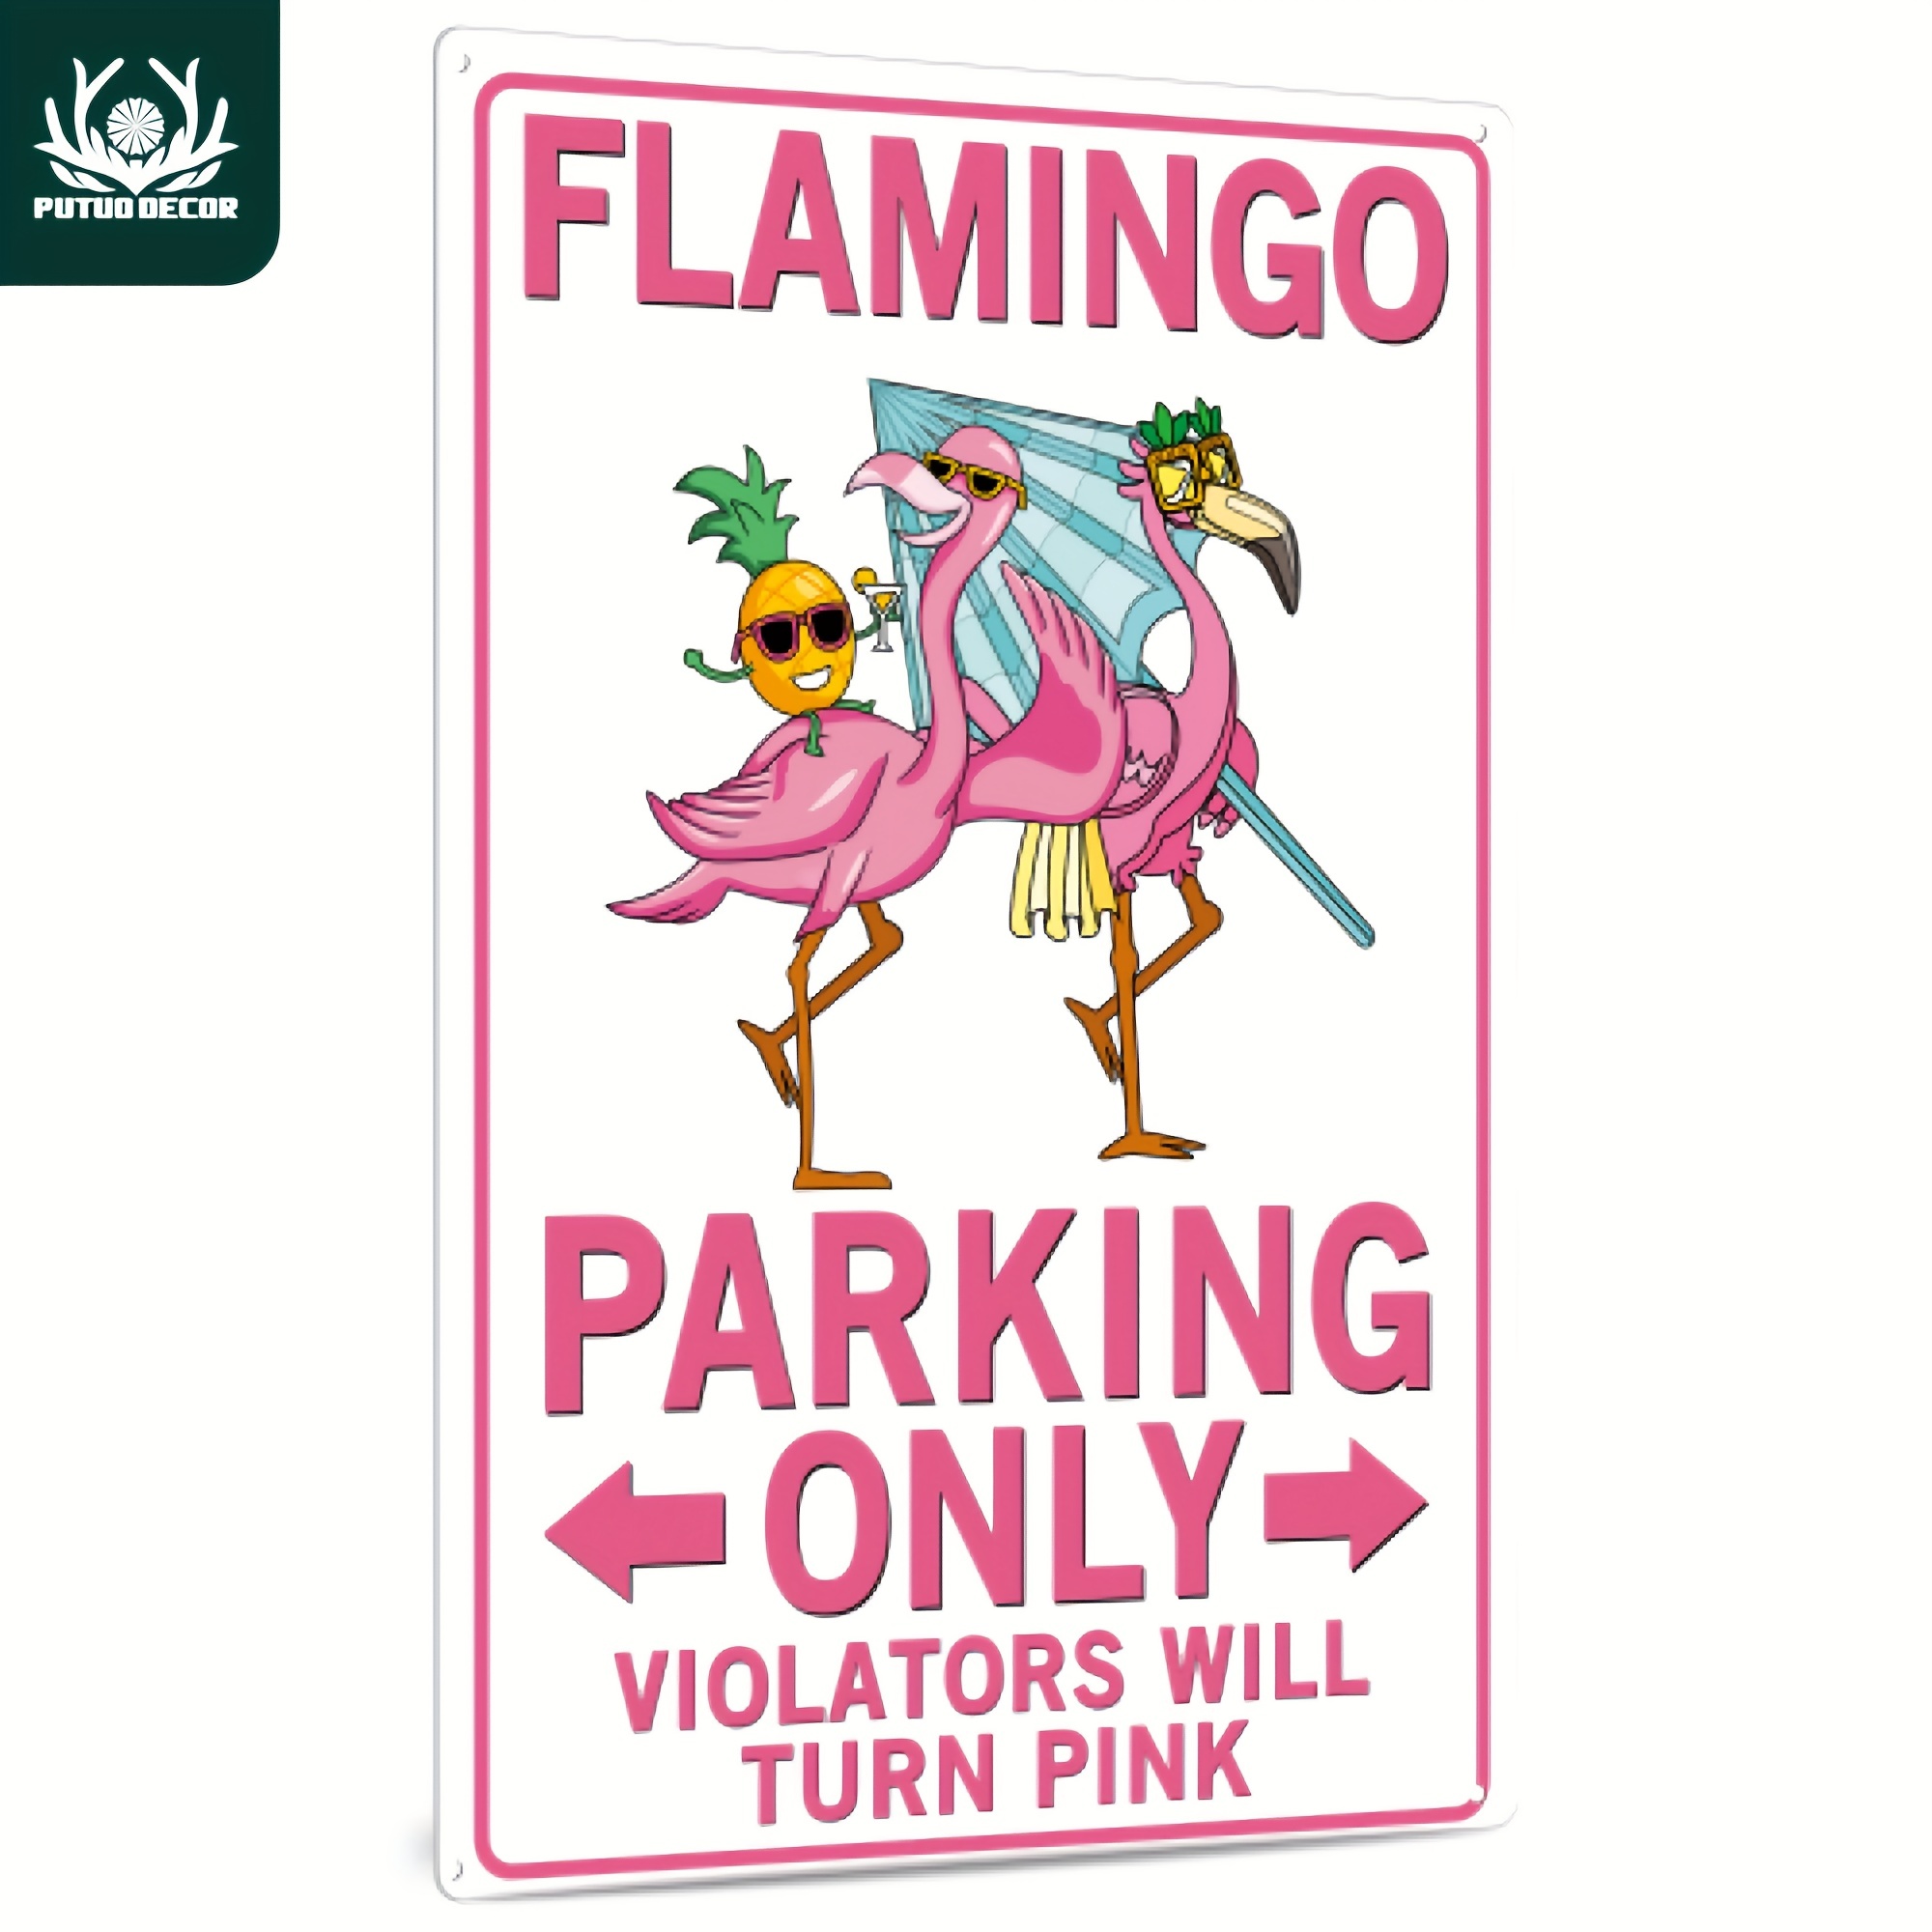 

1pc, Flamingo Parking Only Metal Tin Sign - Vintage Plaque Decor For Home, Restaurant, Bar, Cafe, Garage - Water-proof And Dust-proof Summer Decor